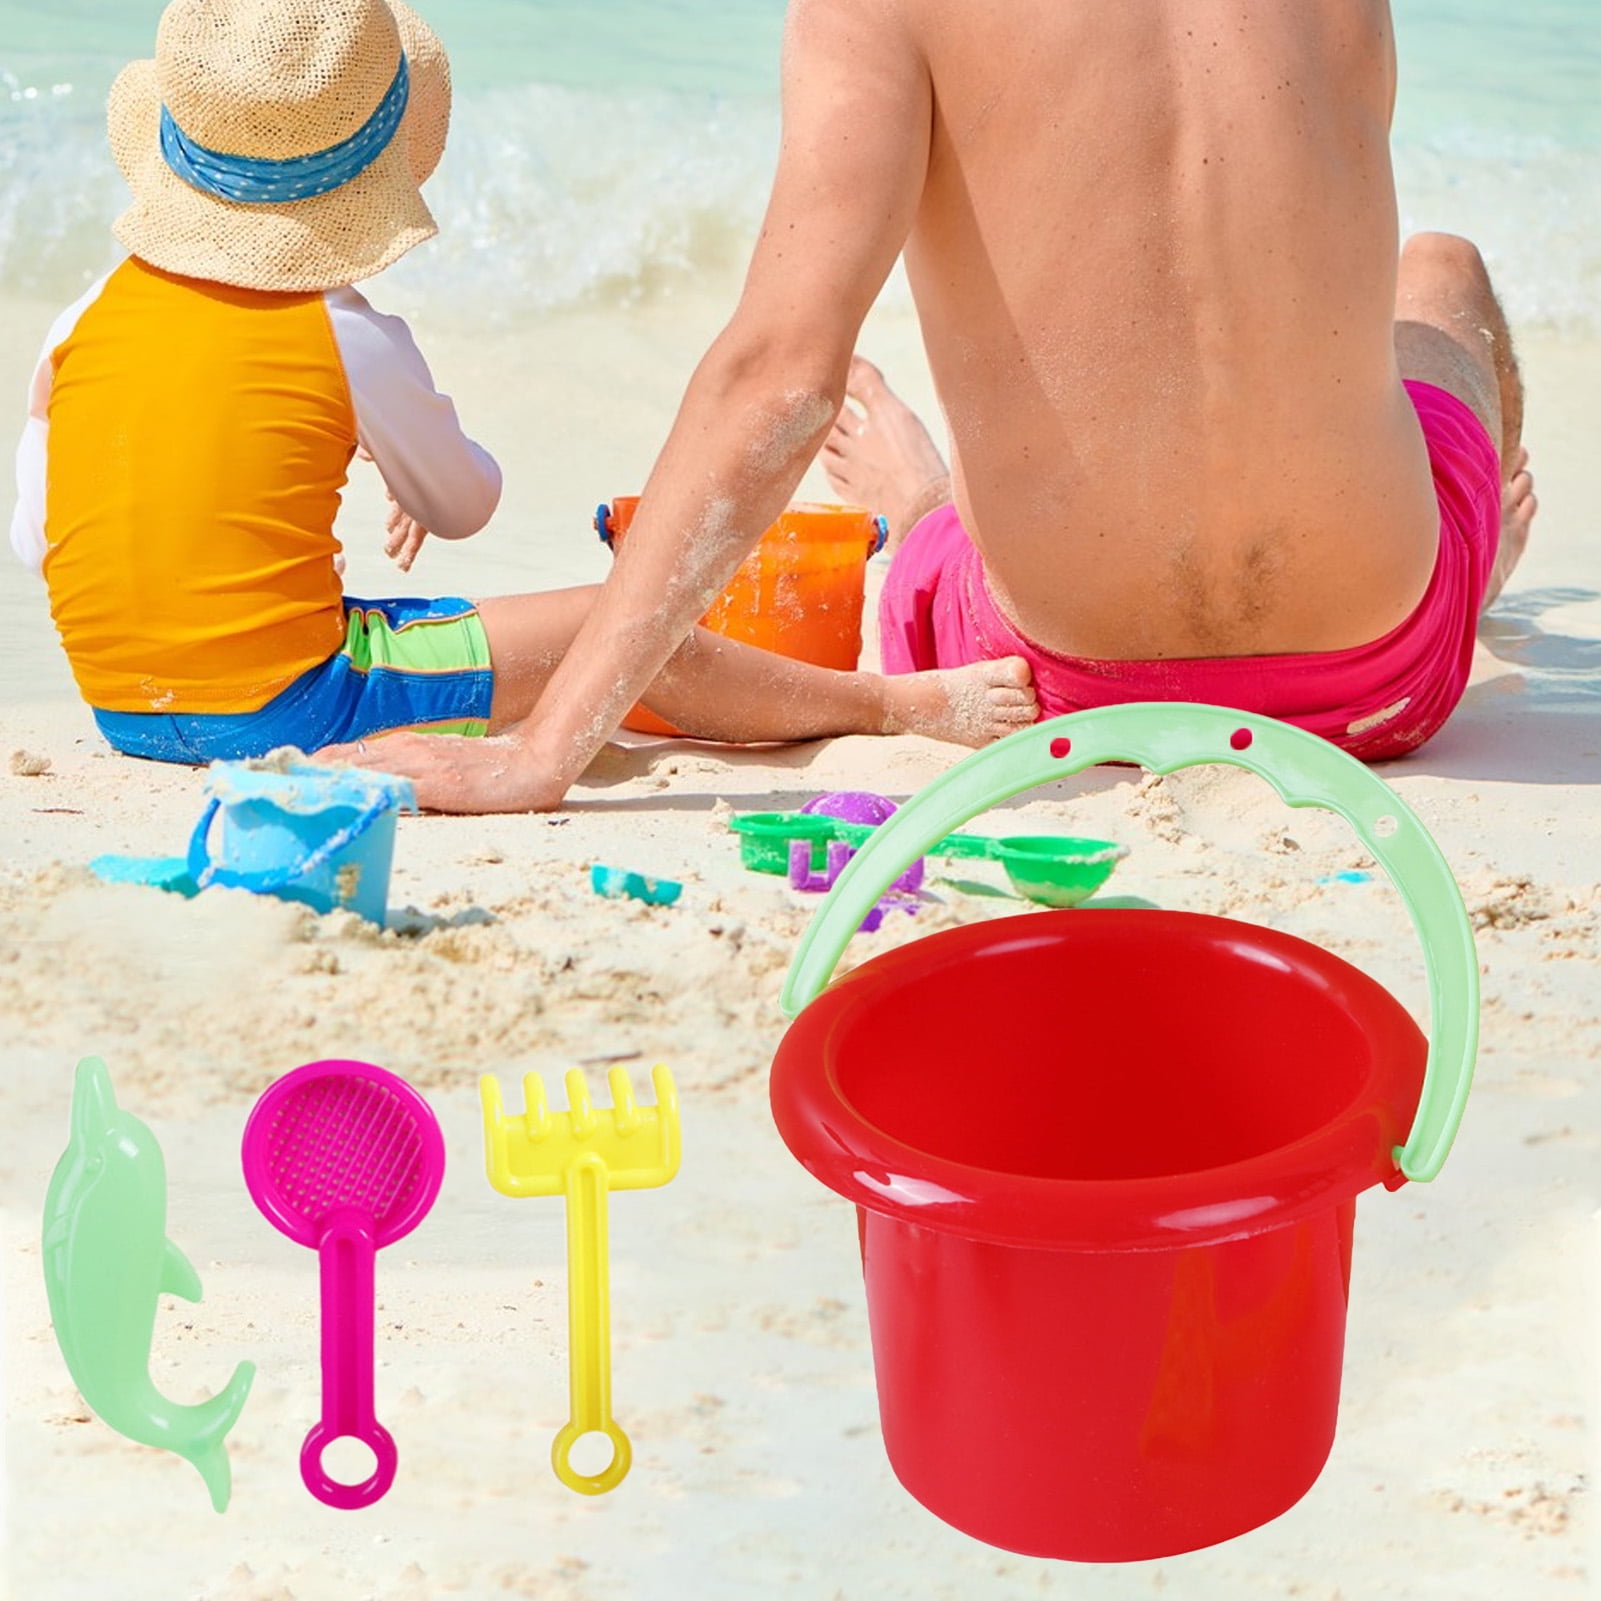 Collapsible Beach Pail Sand Buket Collapsible Buckets Multi Use For Garden  Beach, Camping Gear Beach-Party Fishing Car Washing